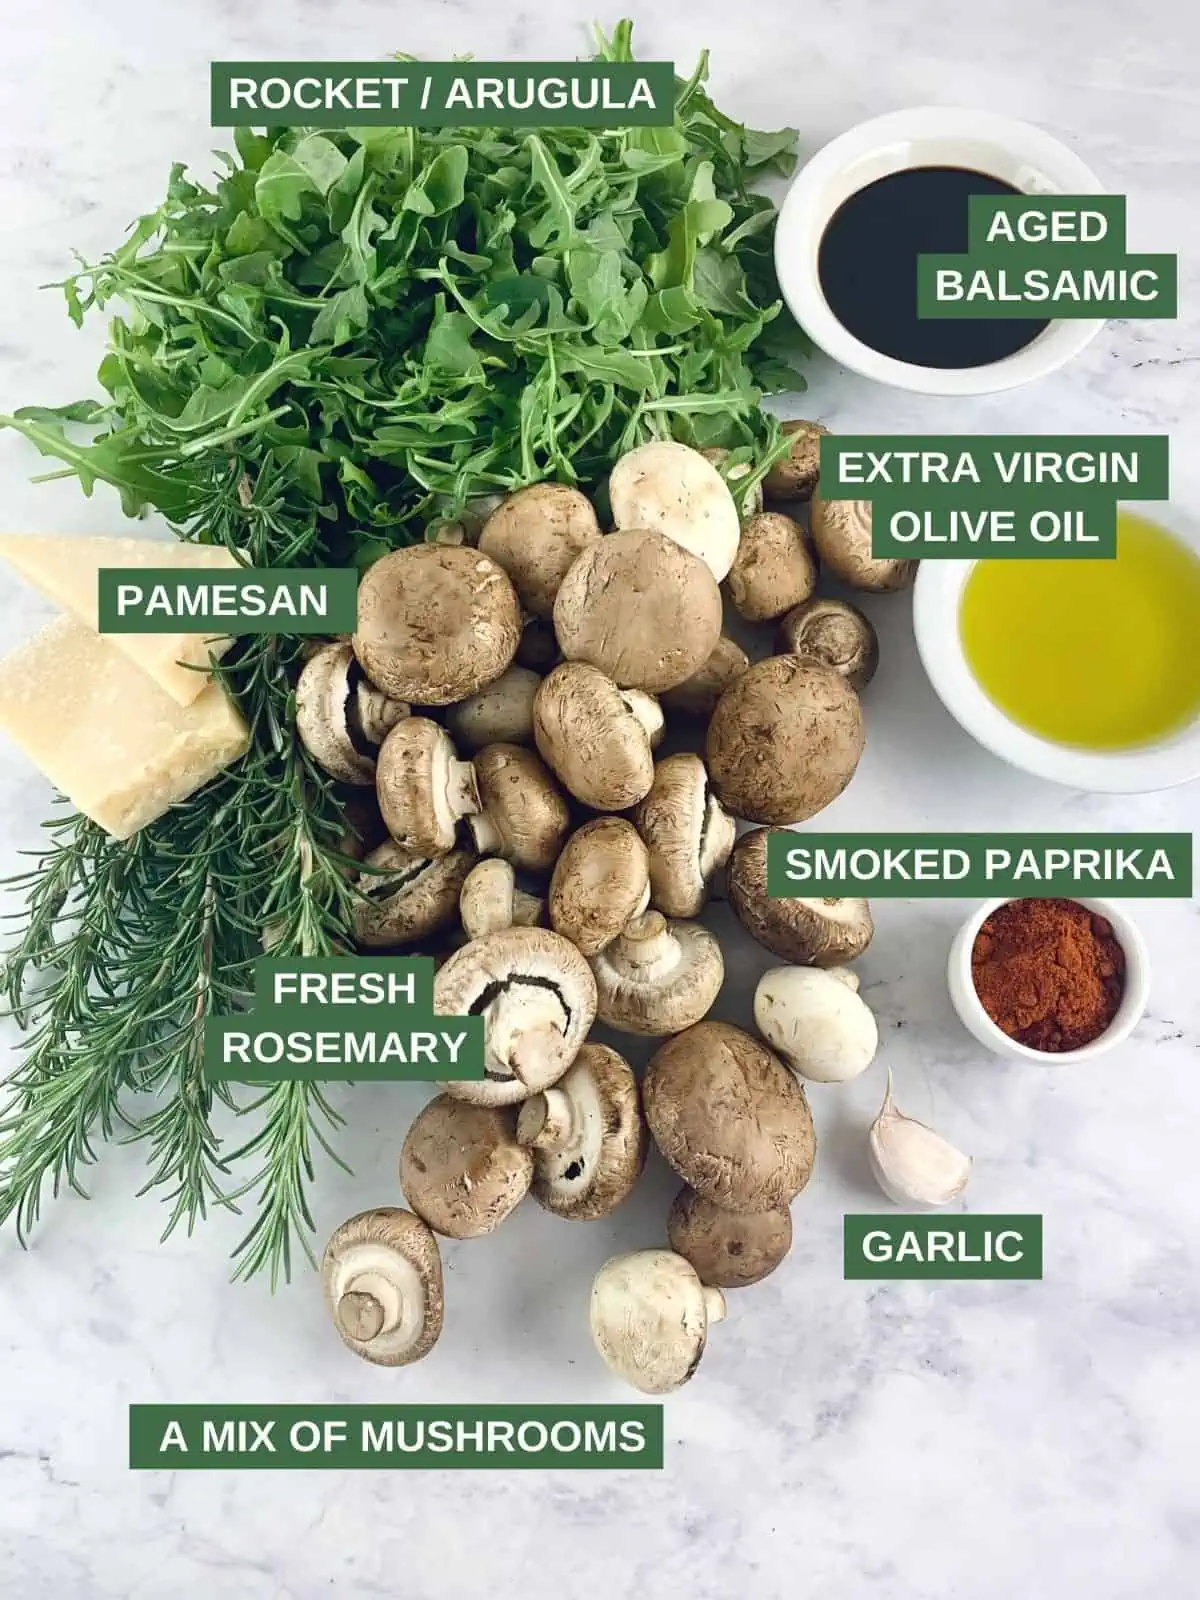 Labelled ingredients needed to make a balsamic mushroom salad recipe.